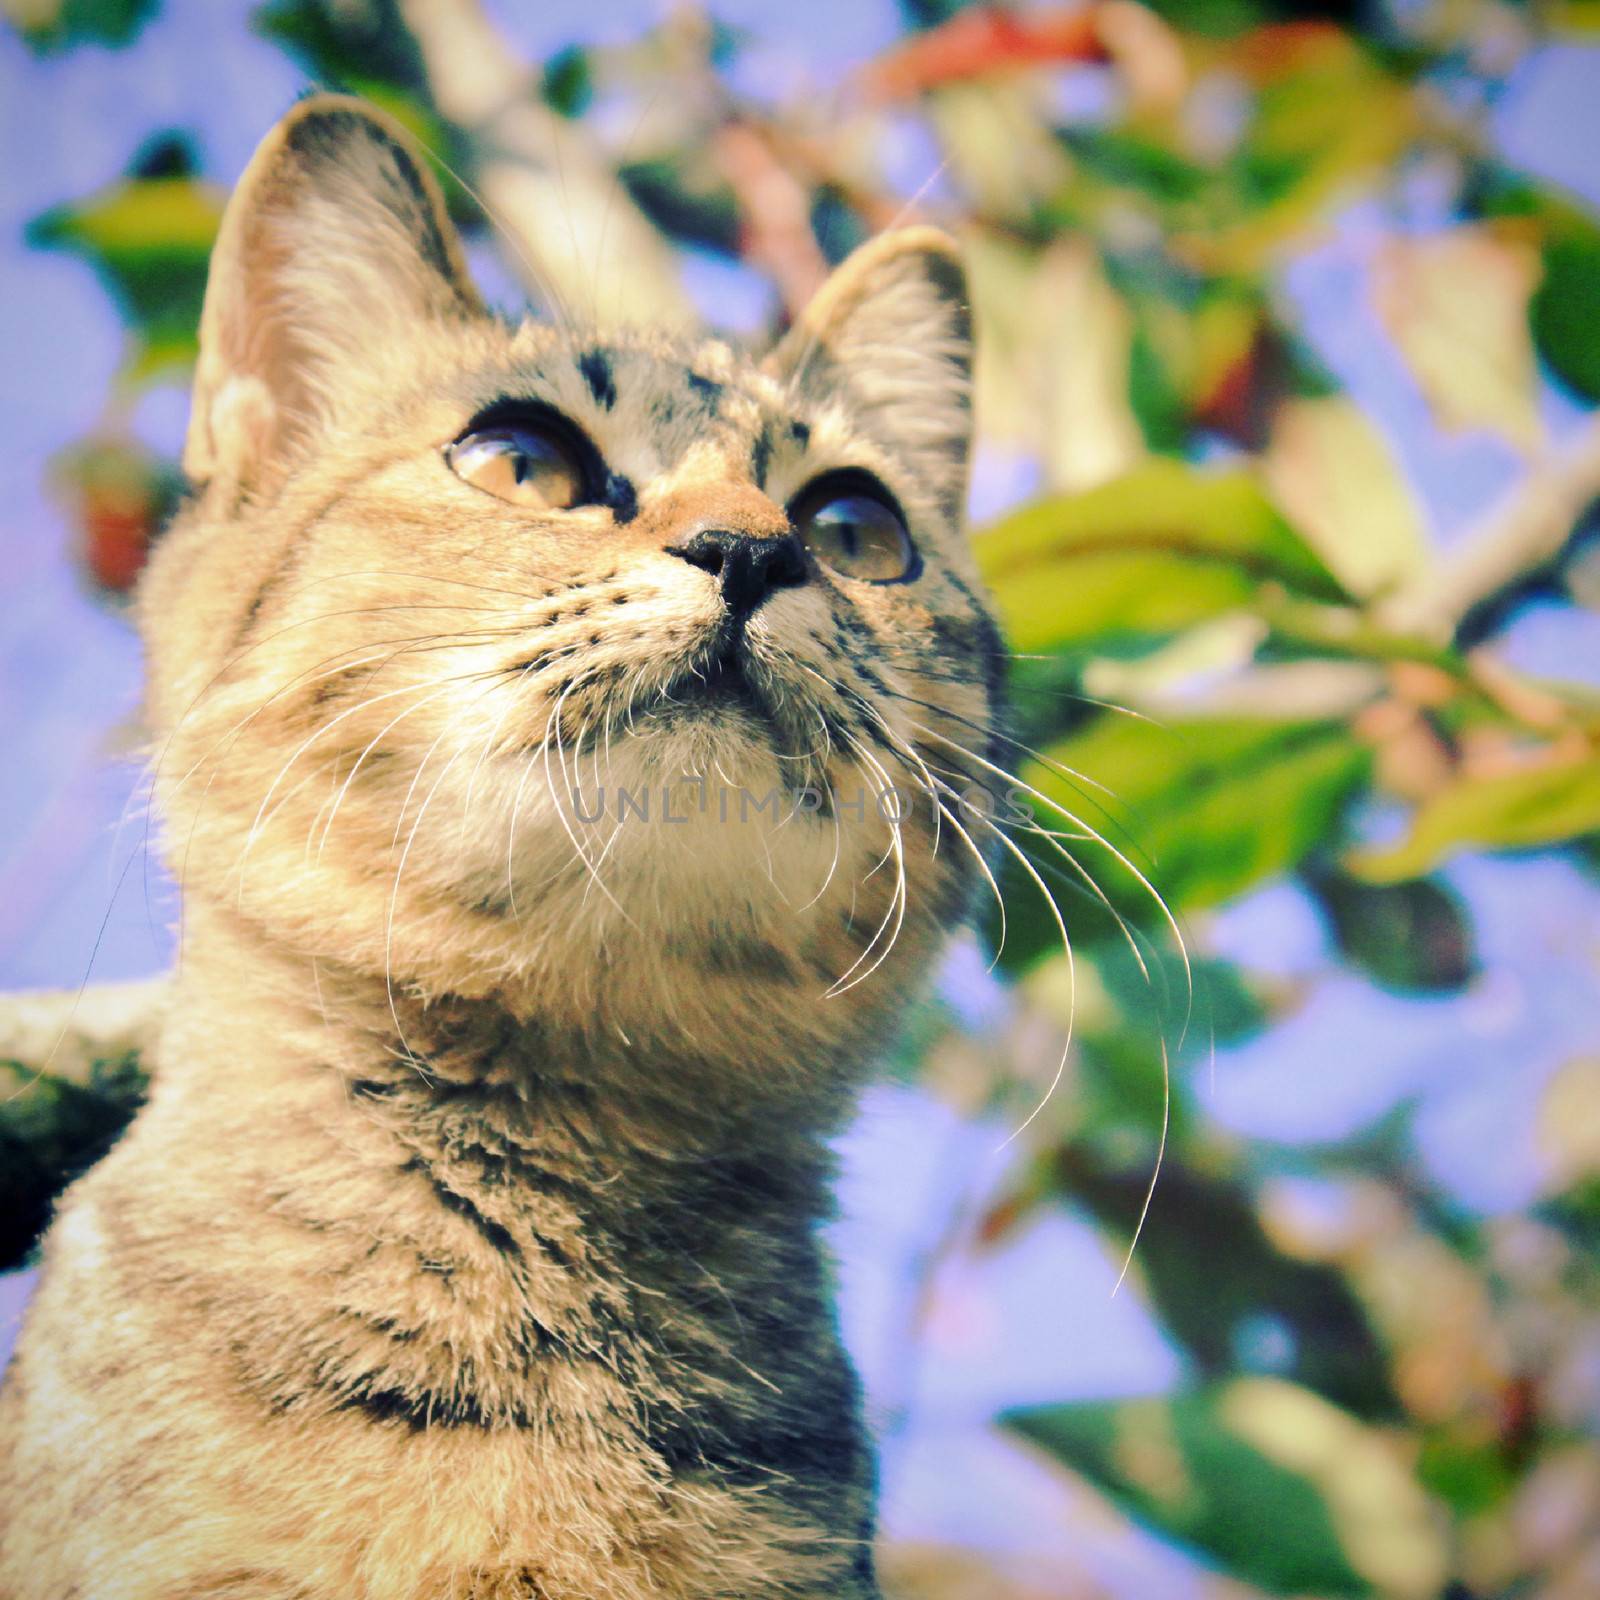 Cute cat on the tree with retro filter effect